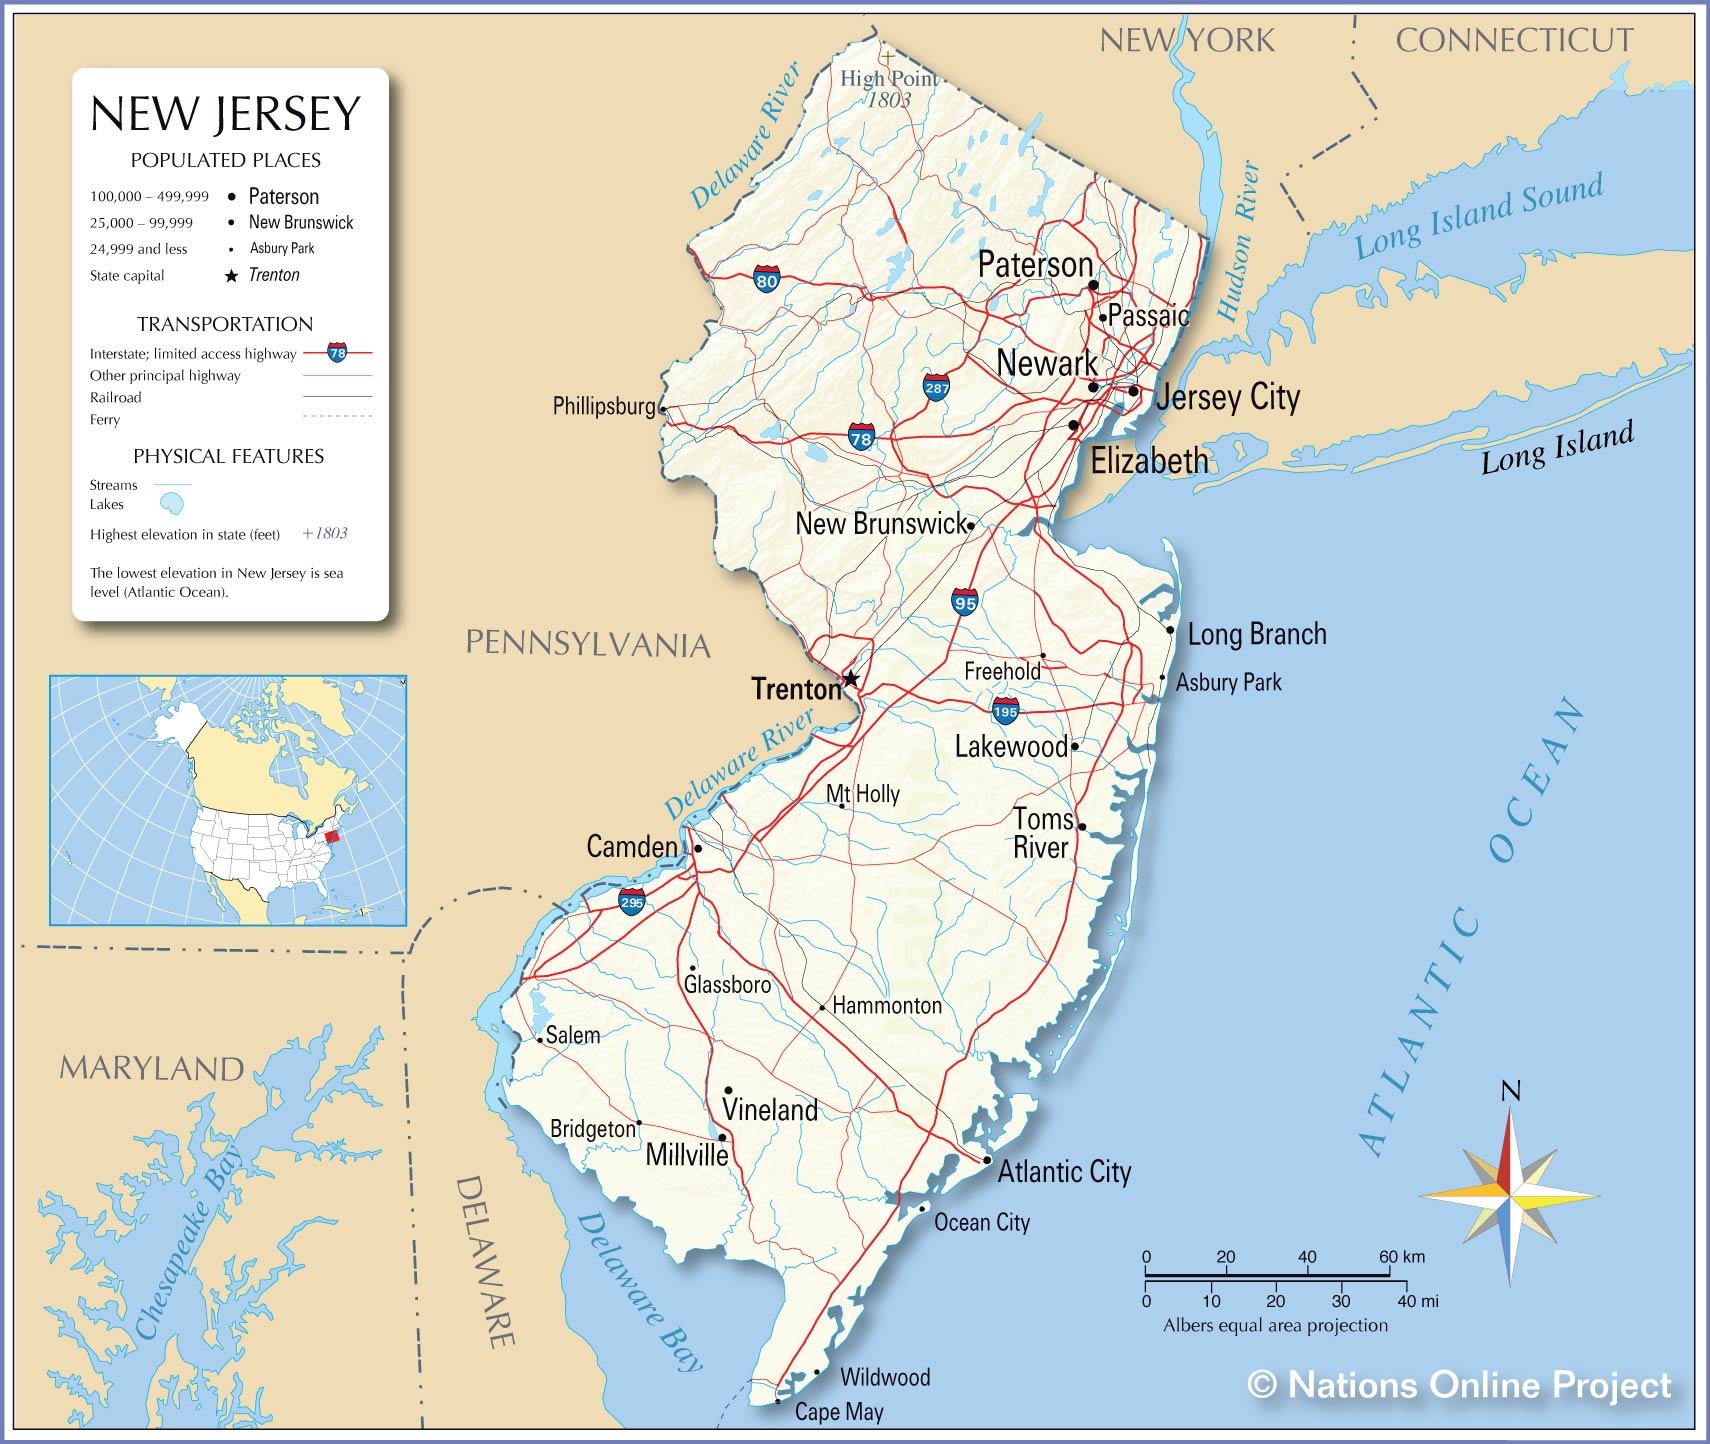 What states border New Jersey?